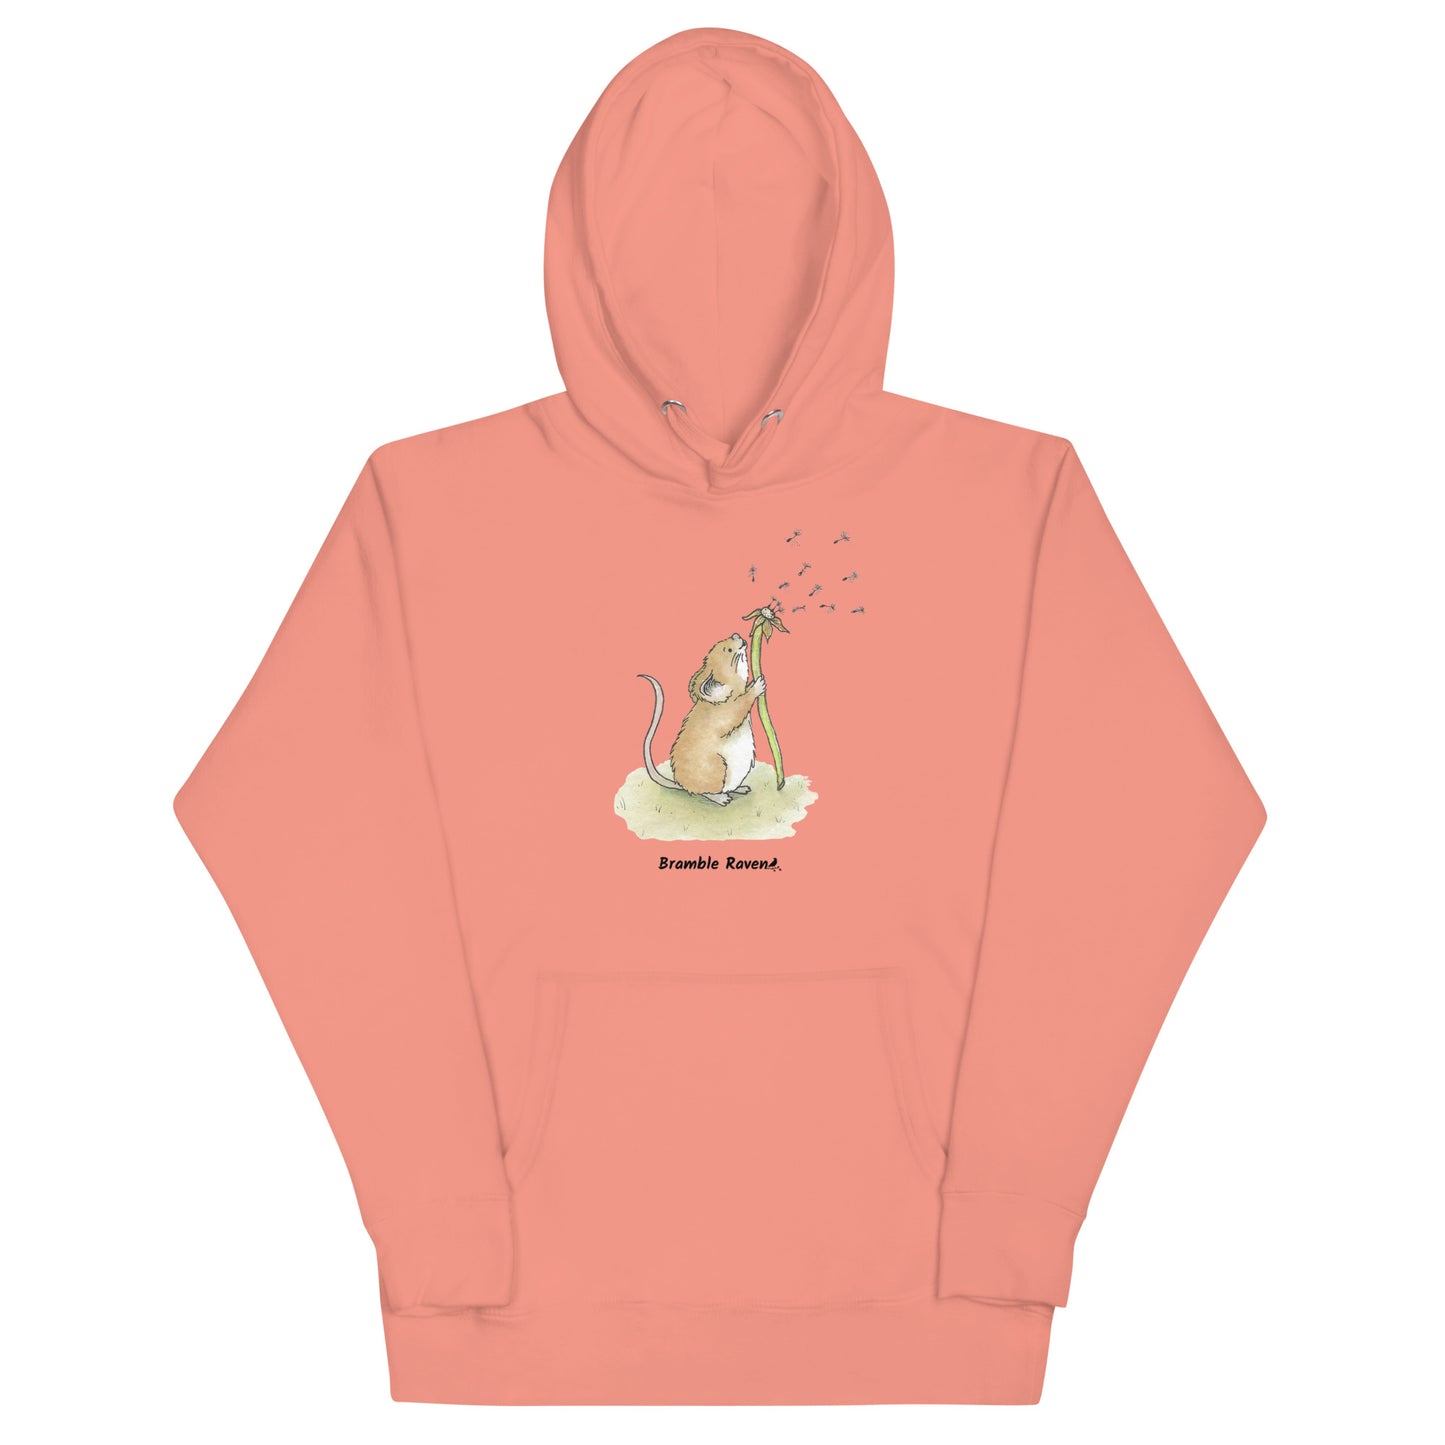 Original Dandelion wish design of cute watercolor mouse blowing dandelion seeds  featured on unisex dusty rose colored hoodie.